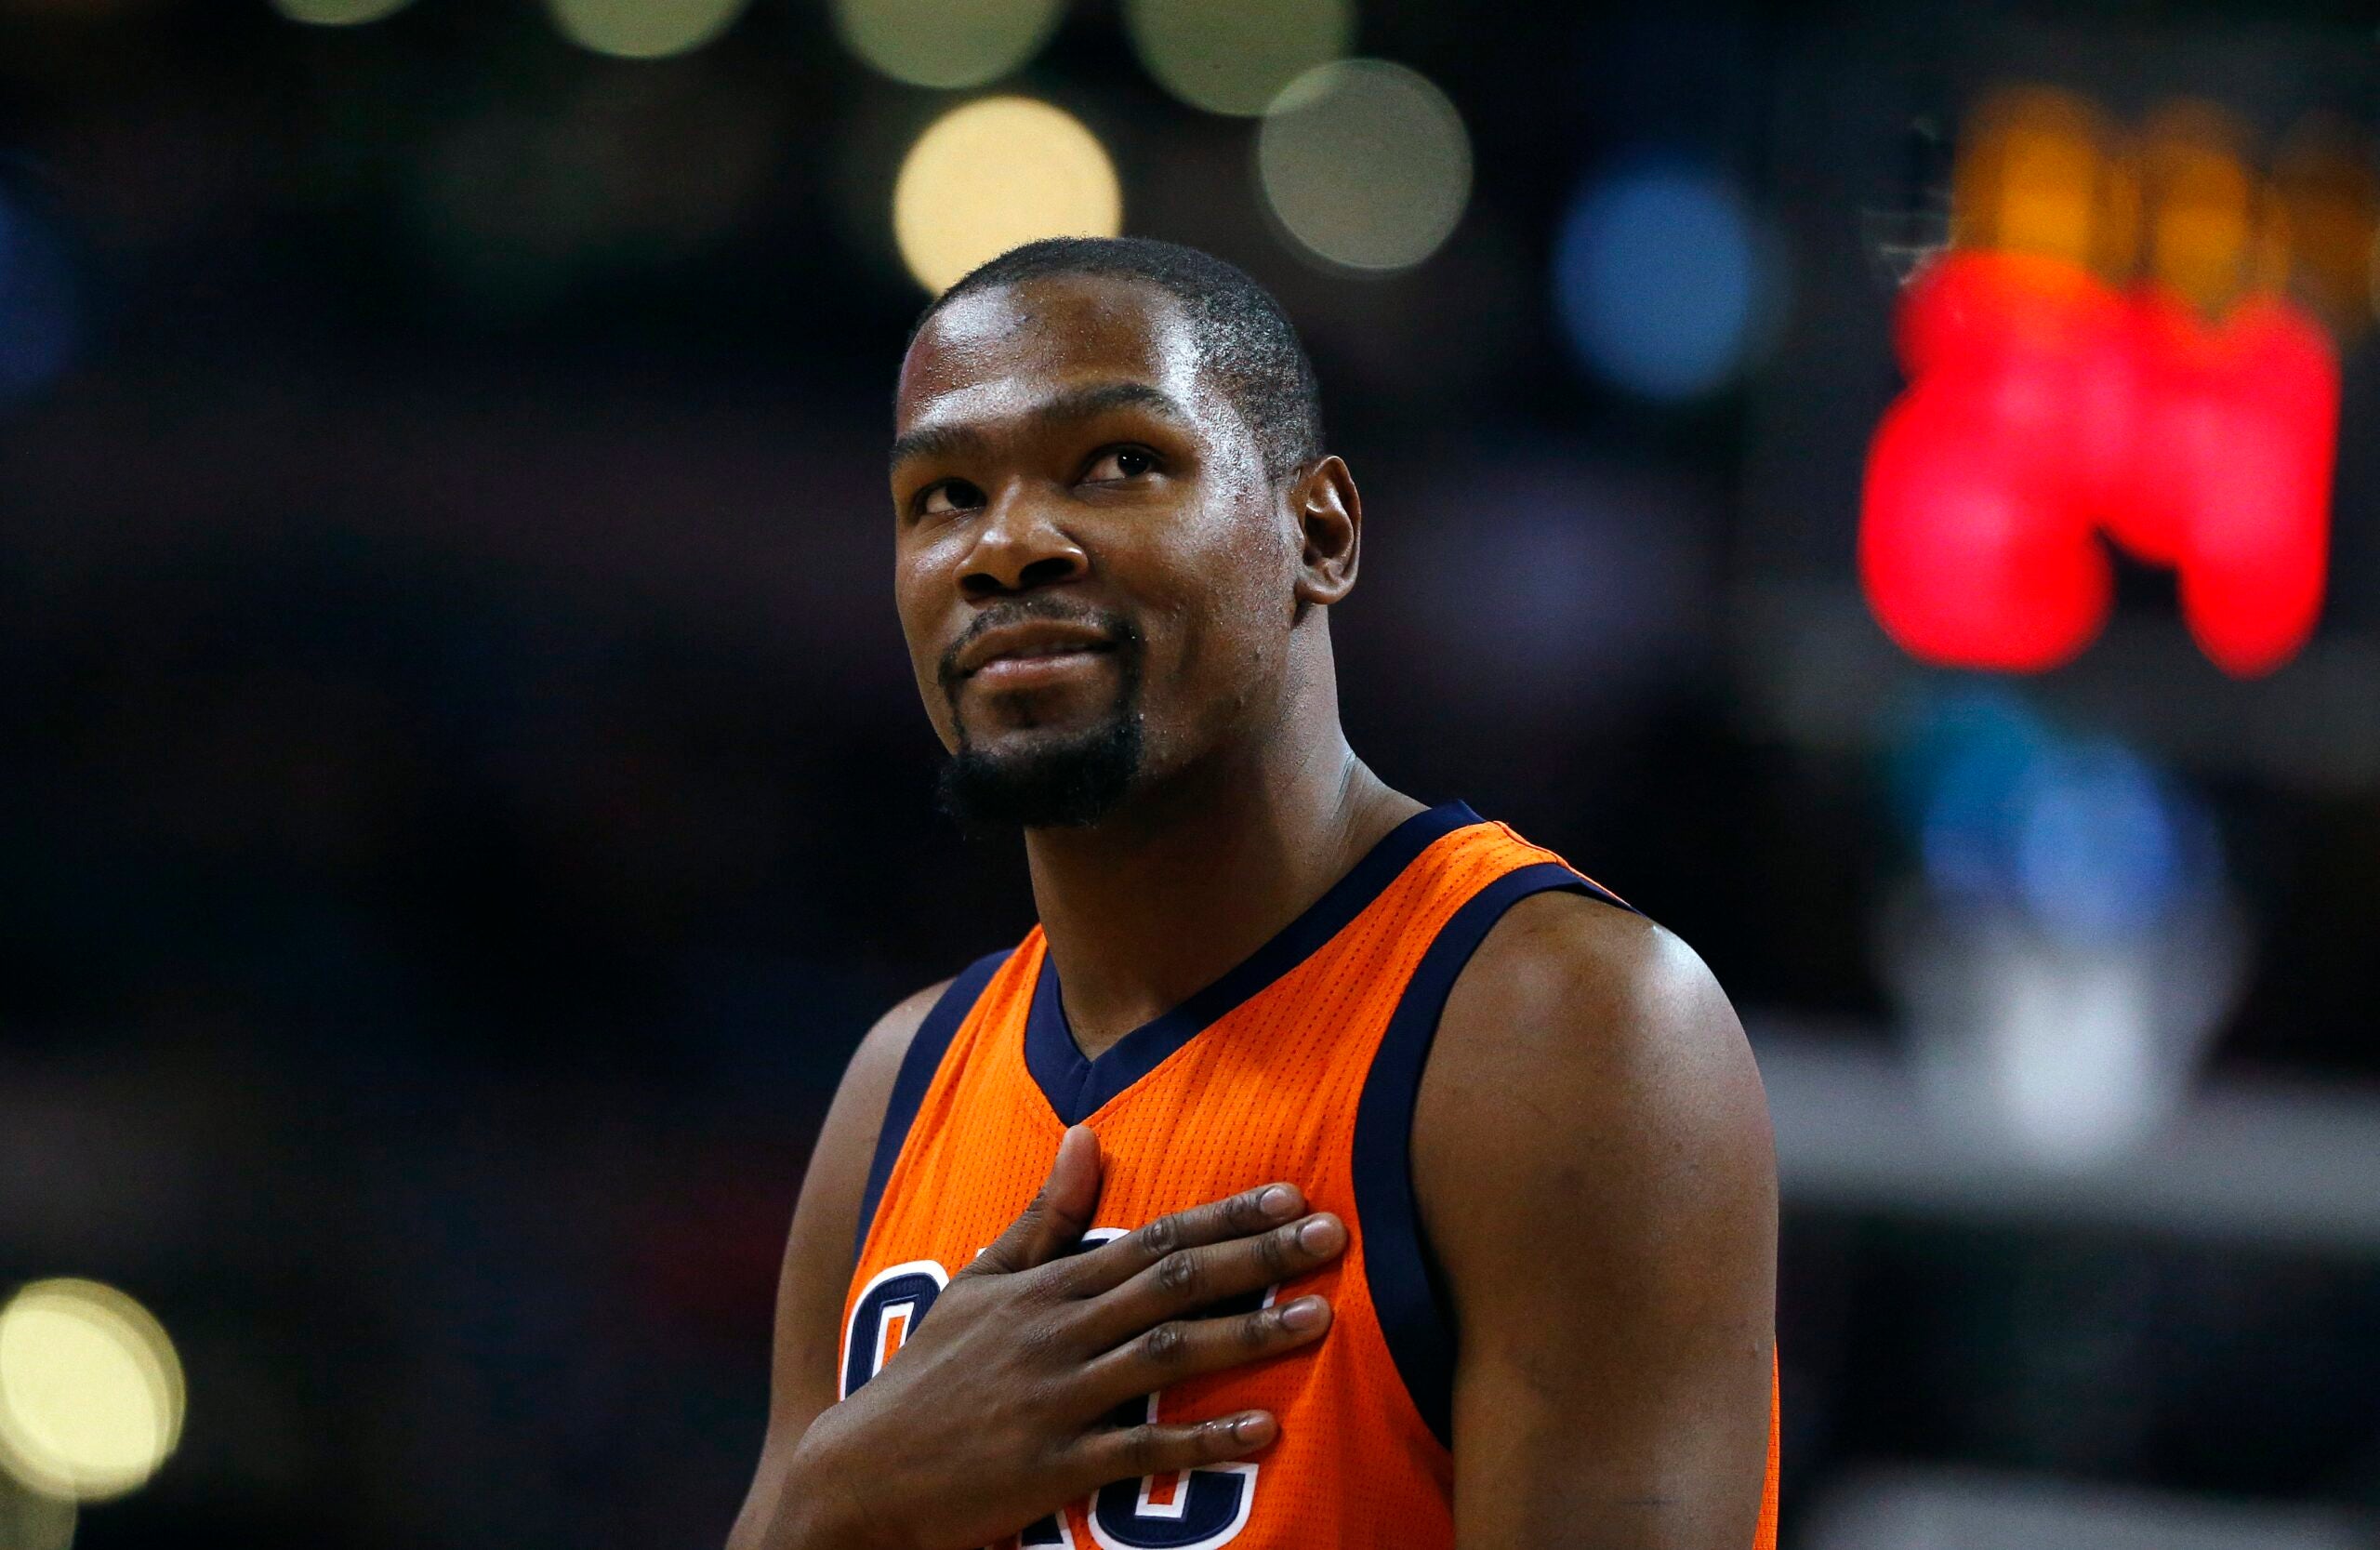 Reggie Lewis's mother gives Celtics blessing to offer Kevin Durant No. 35